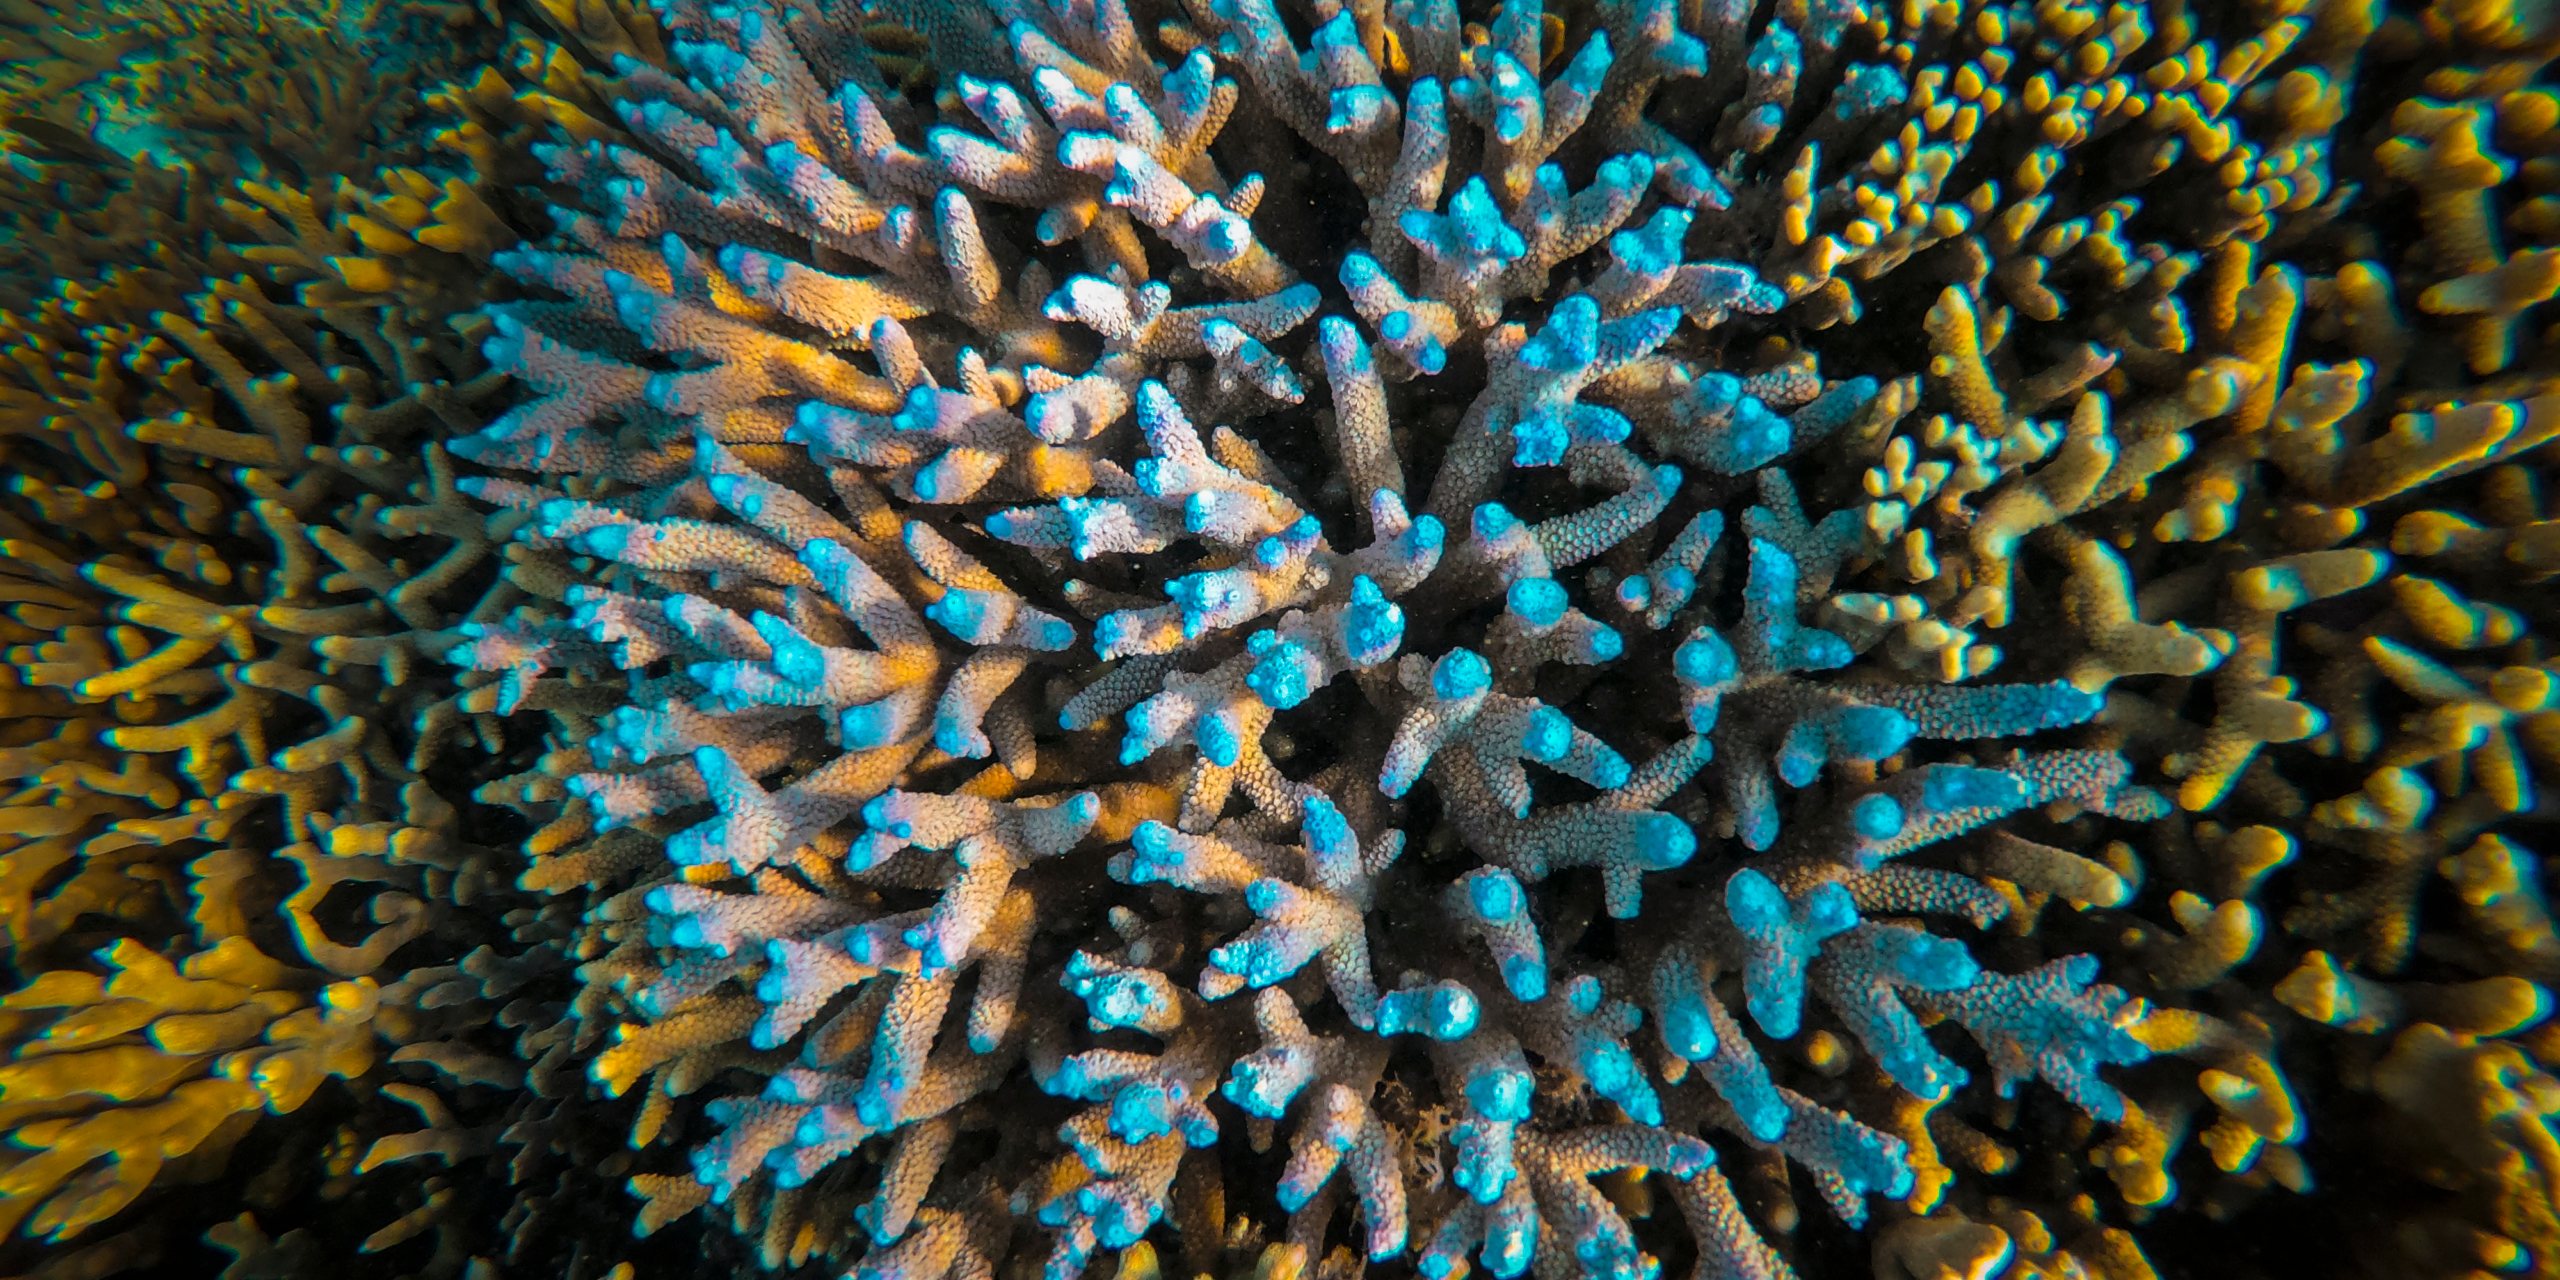 Corals at the reef at lady Elliot island.In the quest to